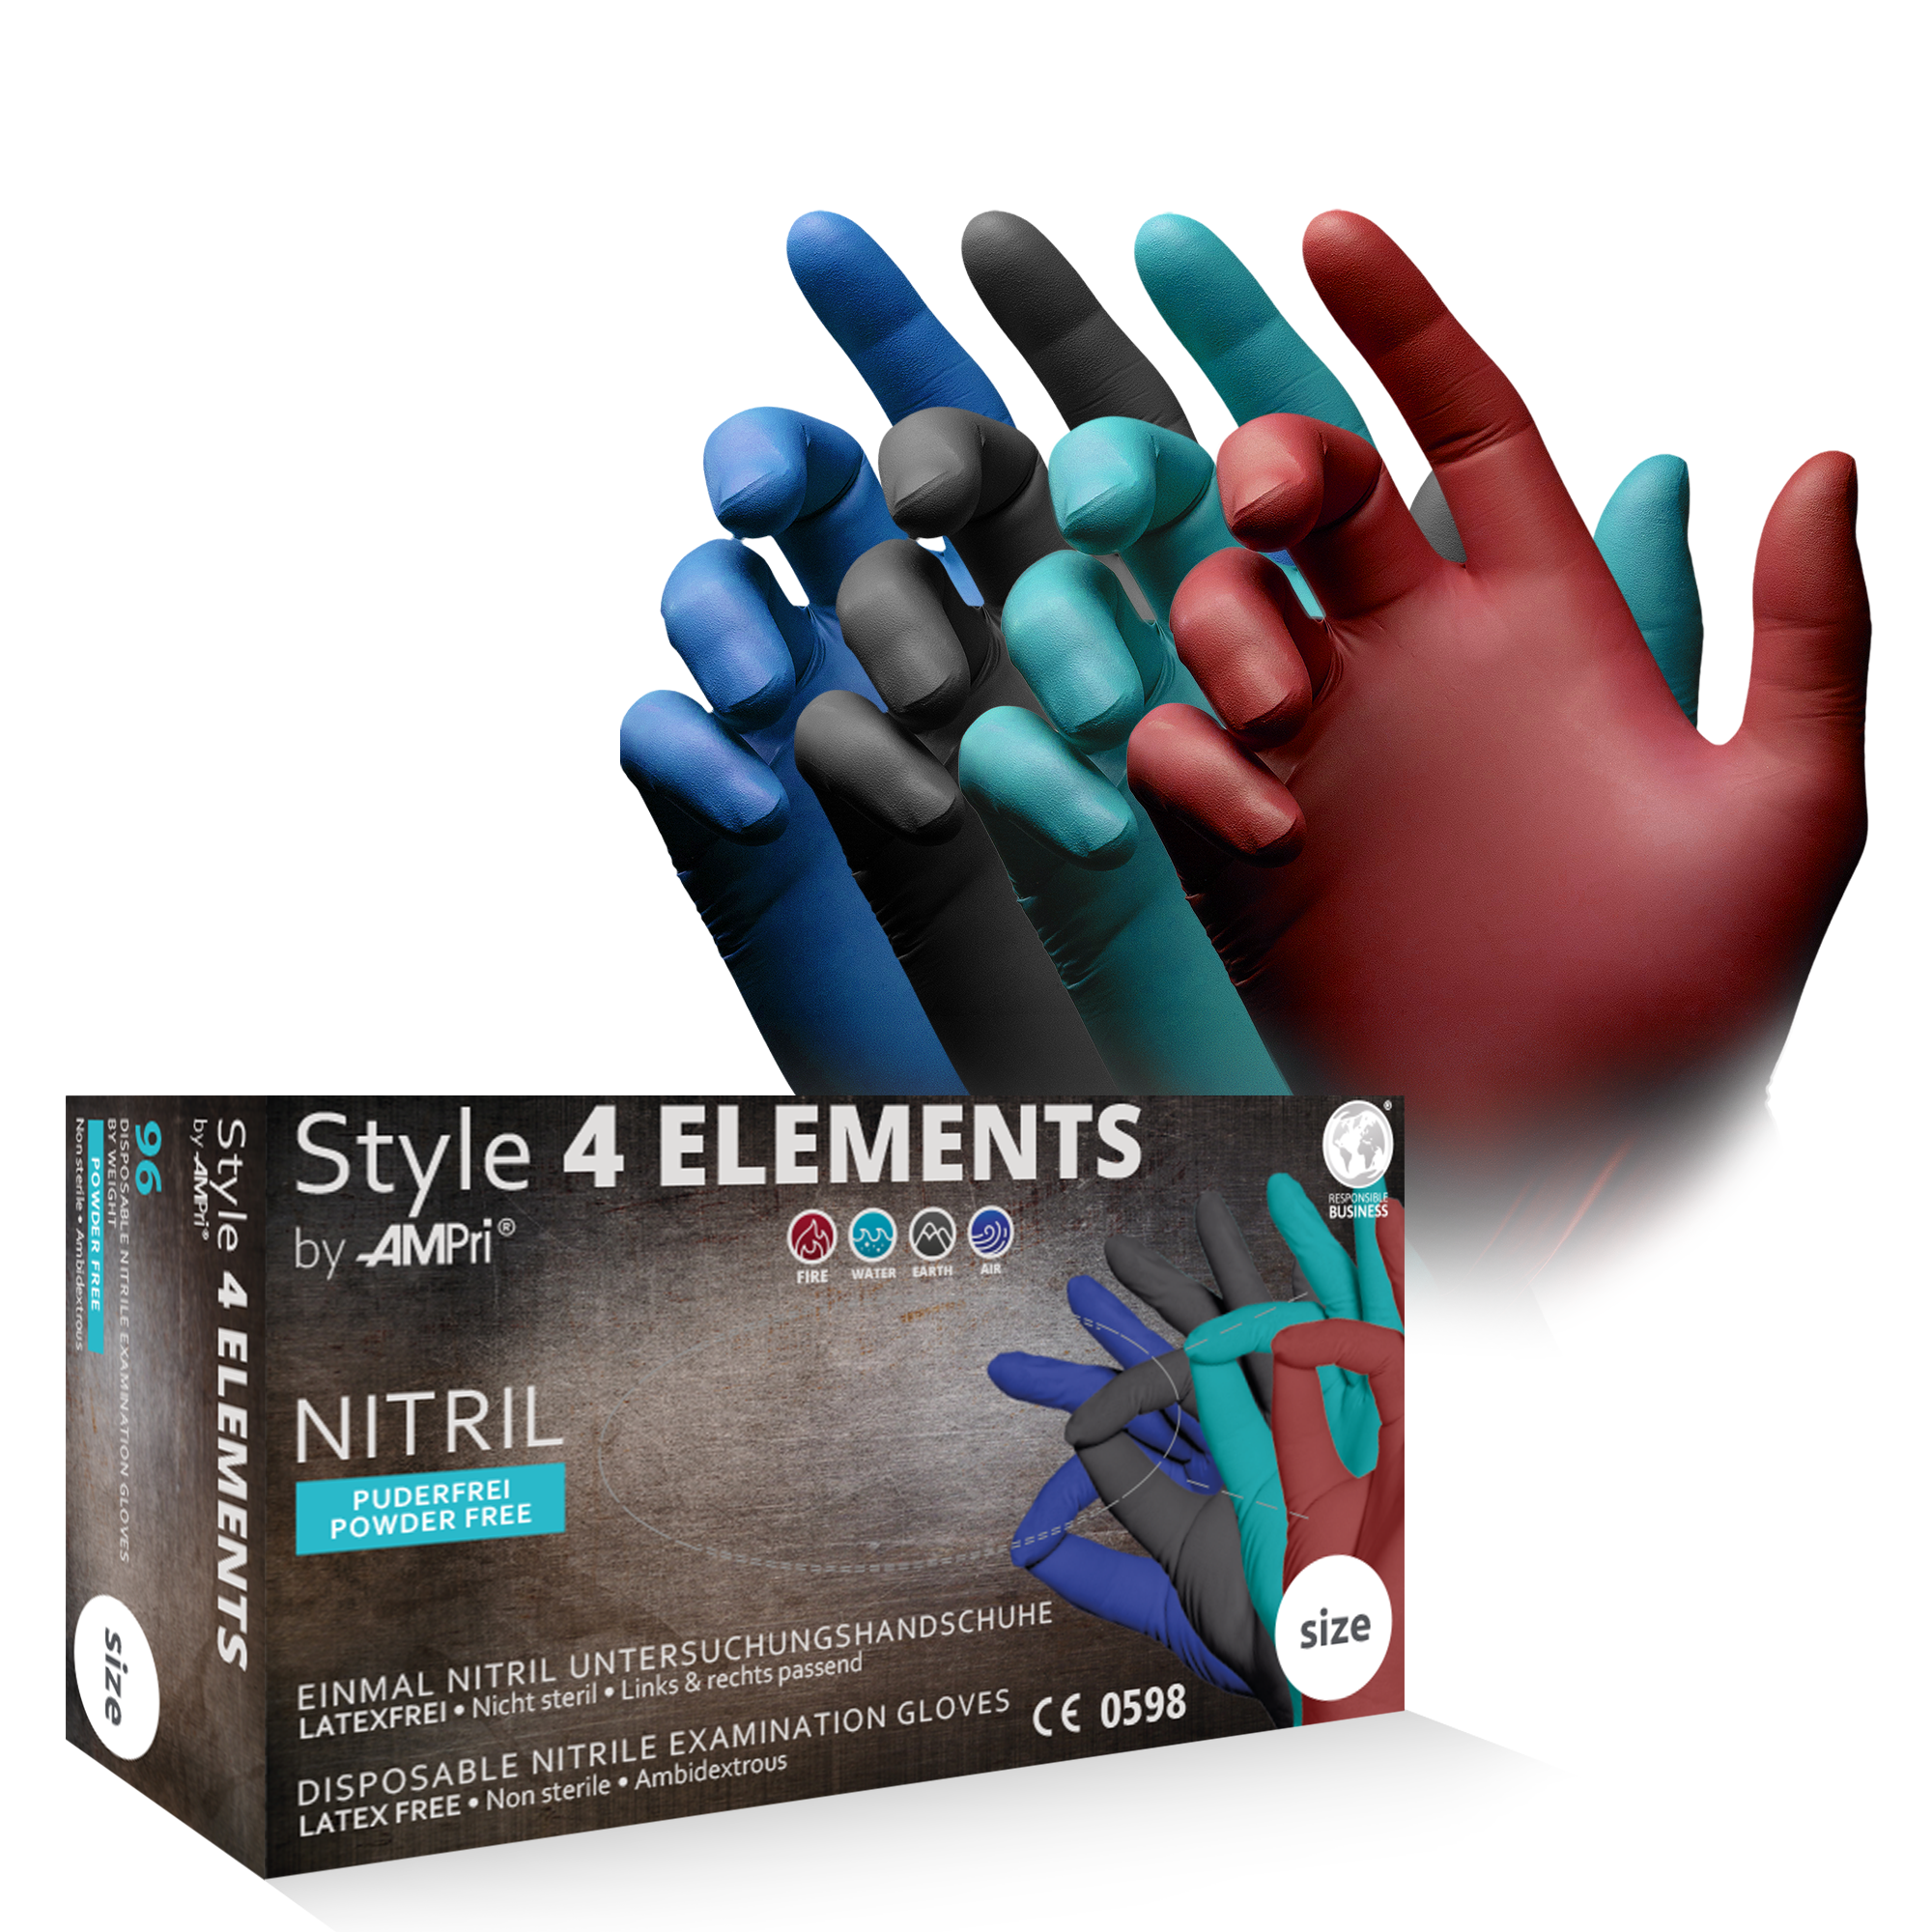 Style 4 Elements, Nitrilhandschuh